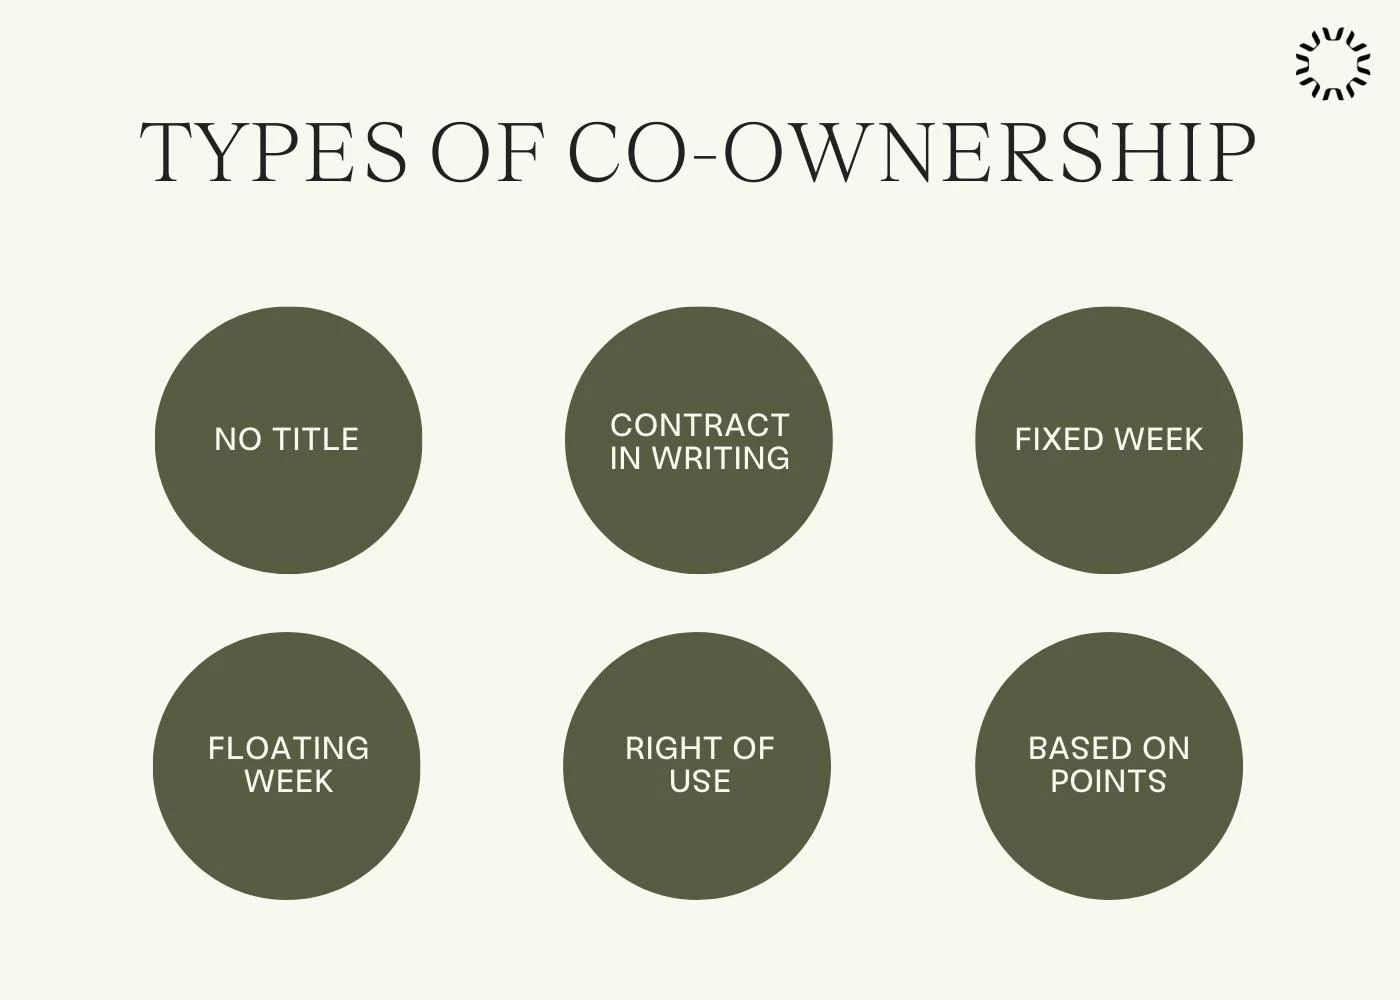 Types of co-ownership